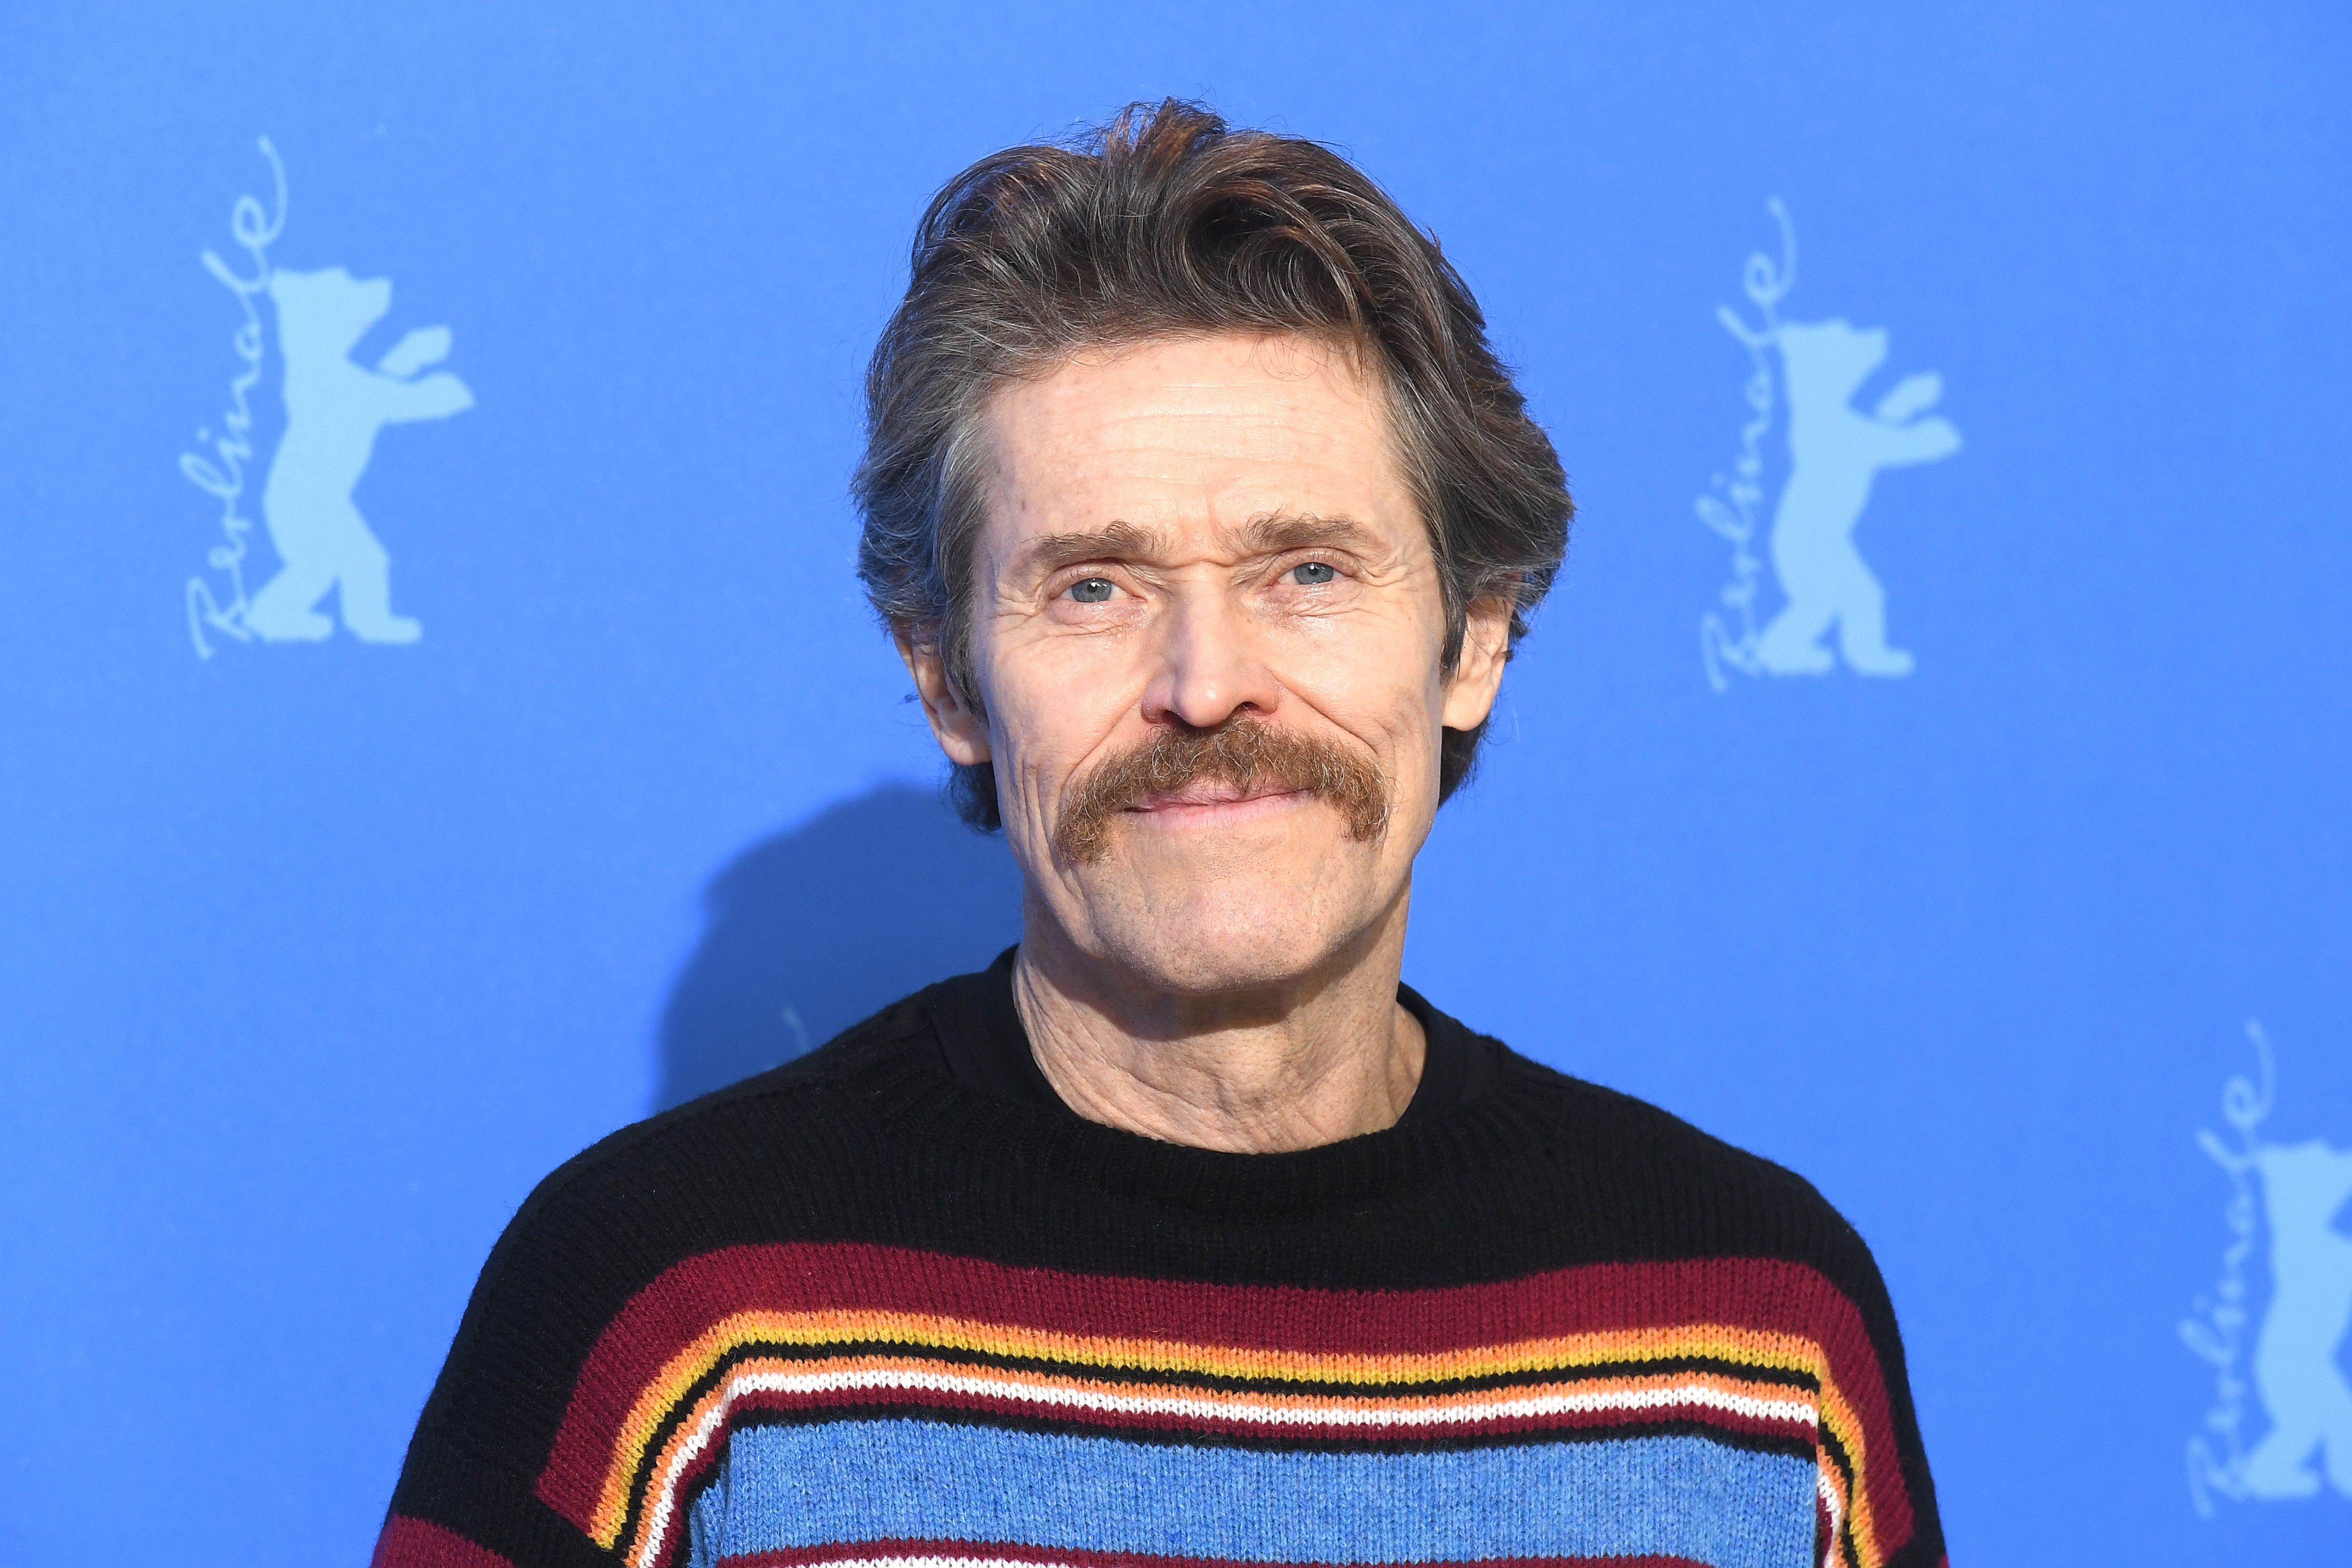 Willem Dafoe Didn't Want 'Spider-Man' Return to Be 'Contrived' Cameo